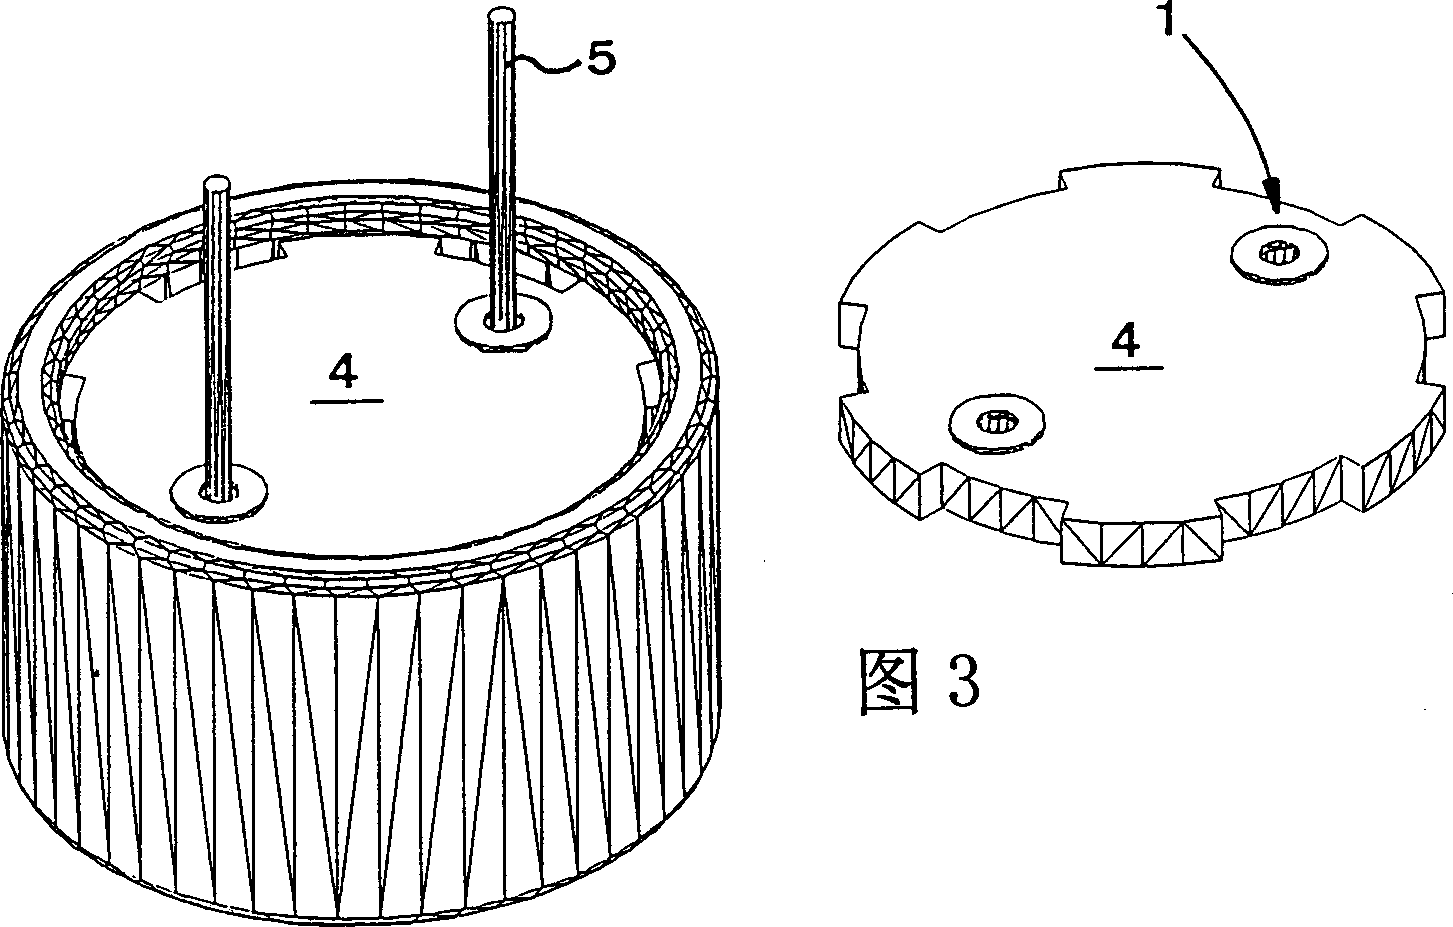 Electrostatic mutual inductor